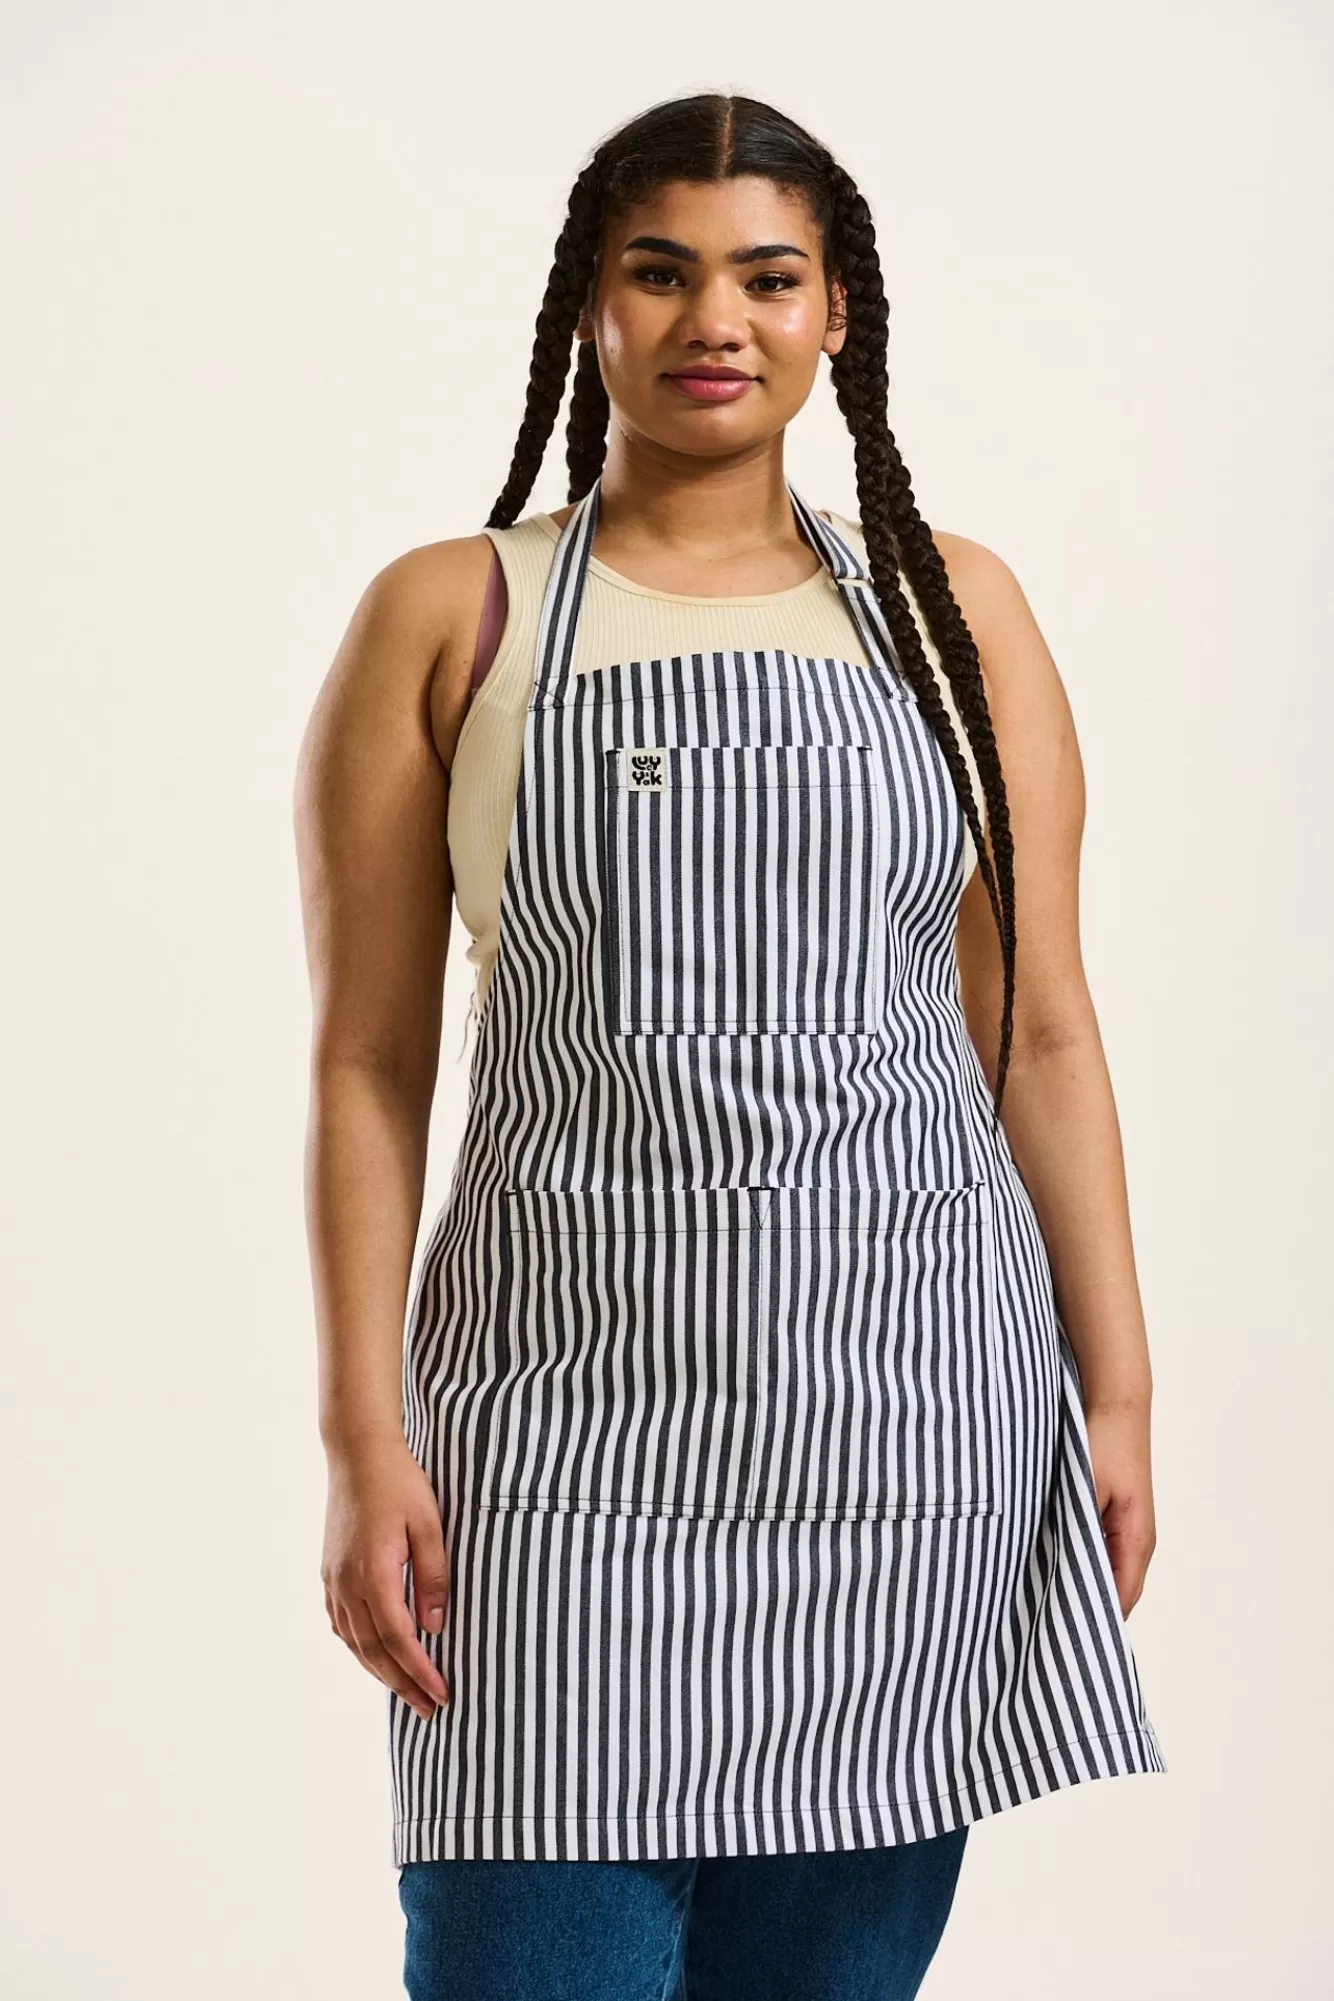 Ada Apron: Deadstock Fabric - Black & White Stripe-Lucy & Yak Outlet